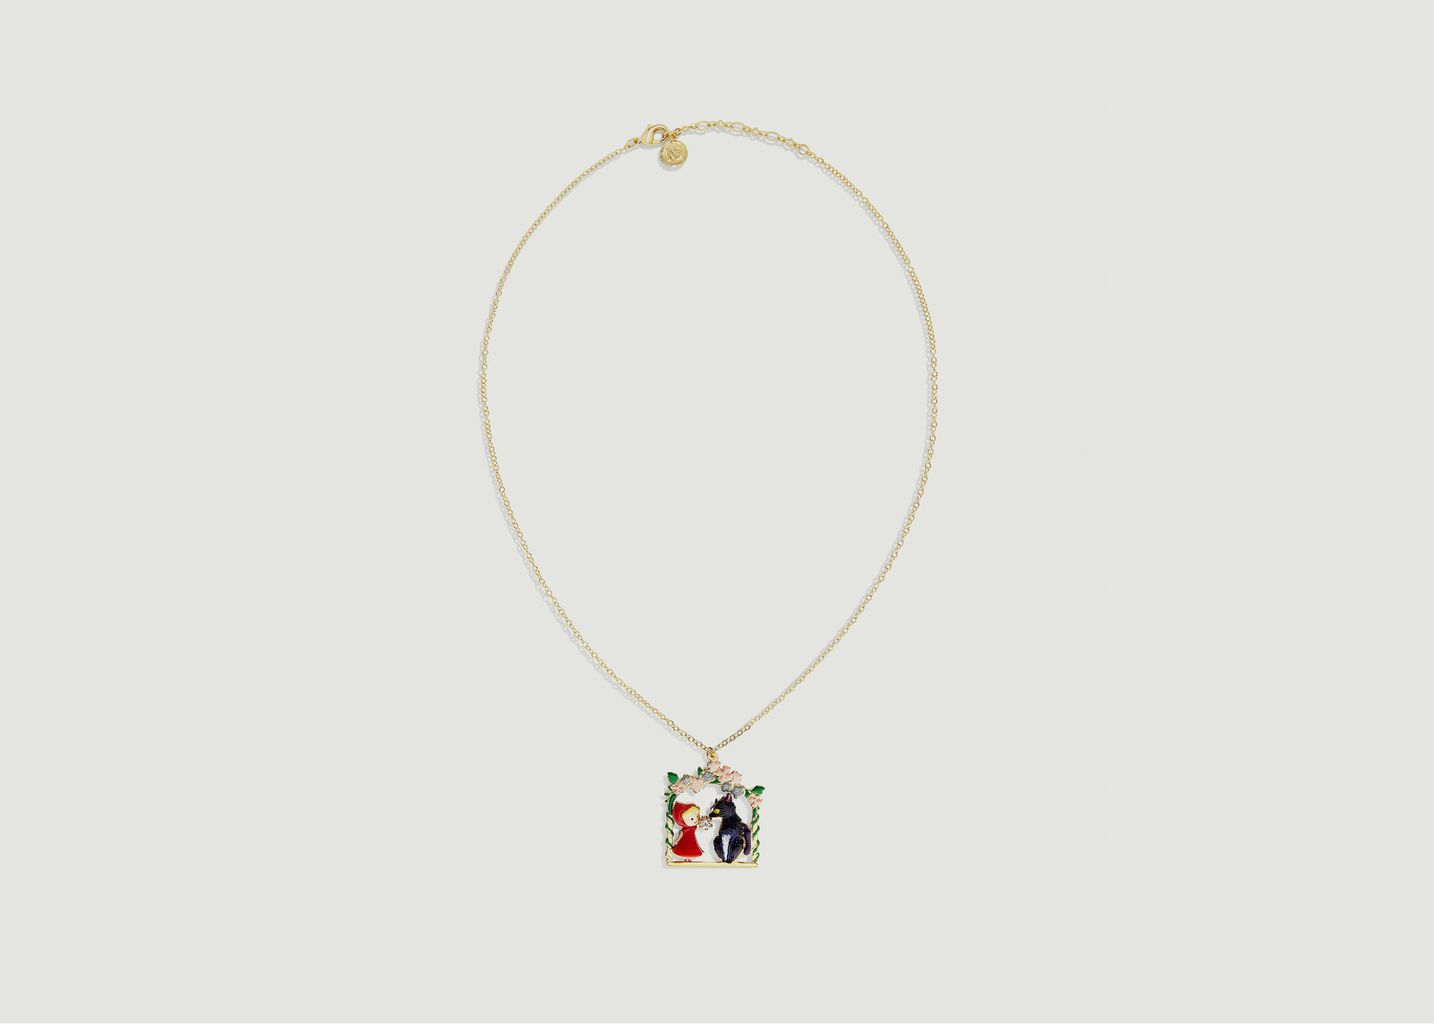 Flowered arch necklace Little red riding hood and wolf - N2